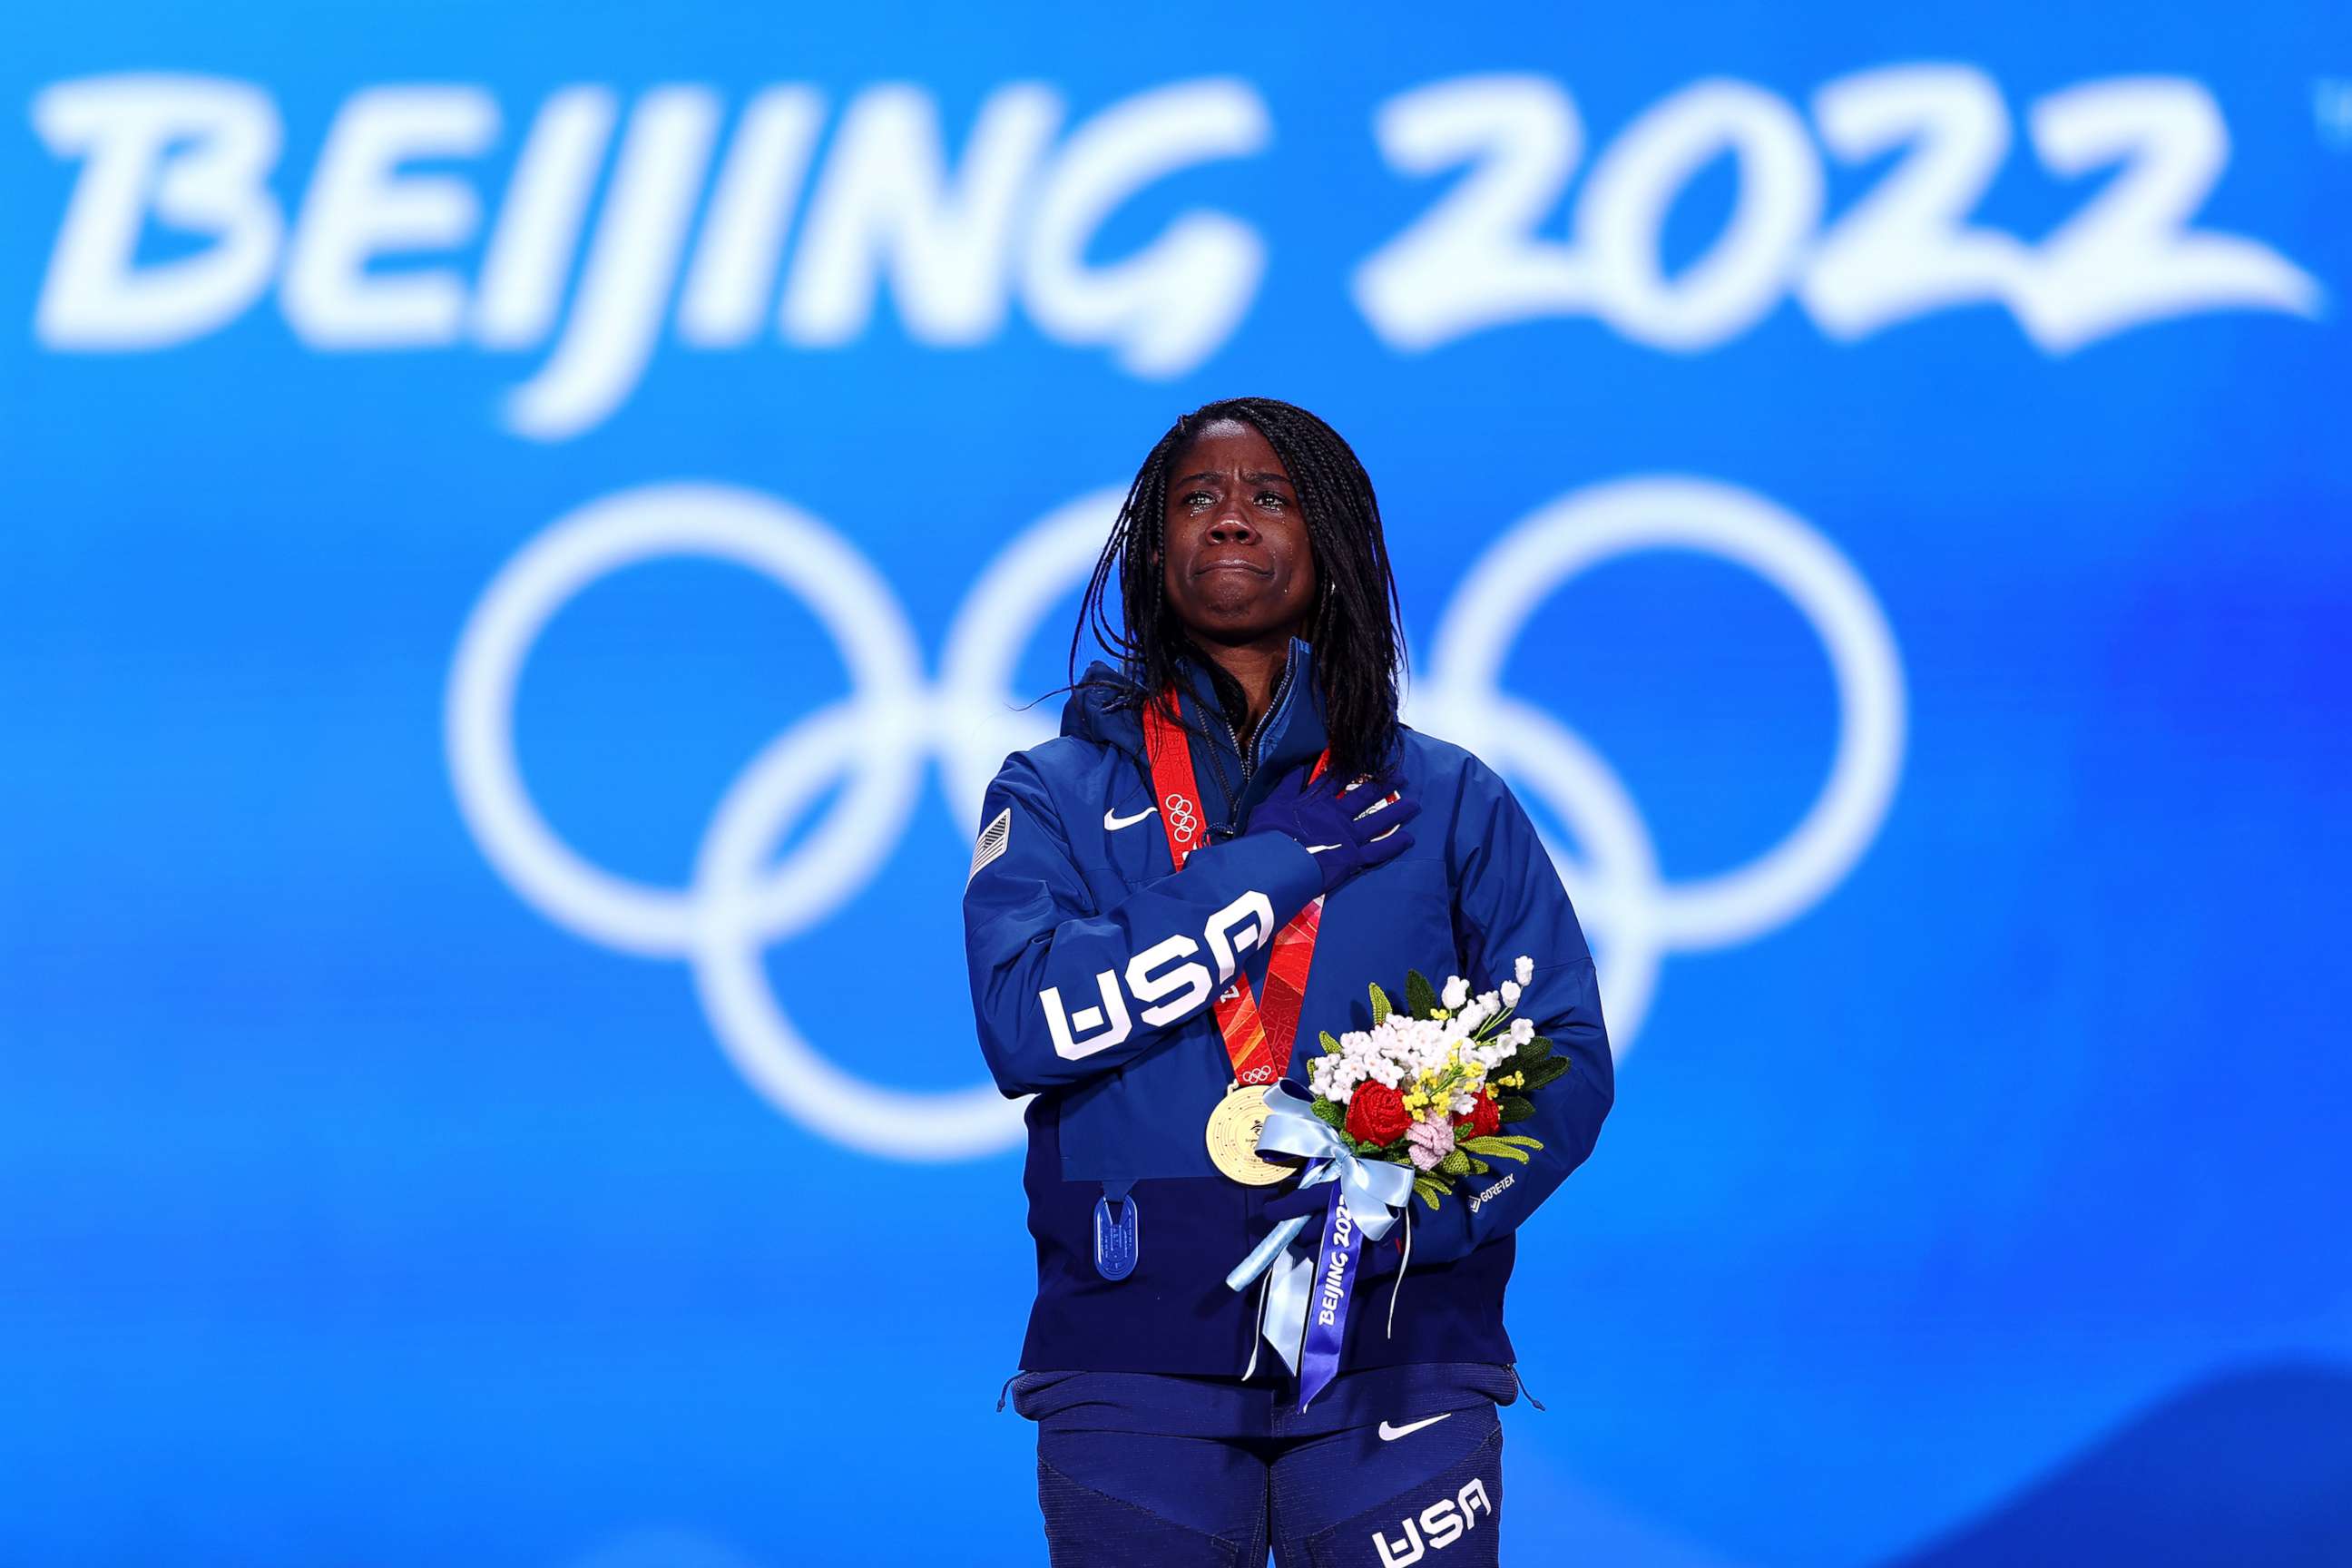 PHOTO: Gold medal-winning speed skater Erin Jackson of Team United States reacts during the Women's 500m medal ceremony on Day 10 of the 2022 Winter Olympics at Medal Plaza, in Beijing, Feb. 14, 2022.  